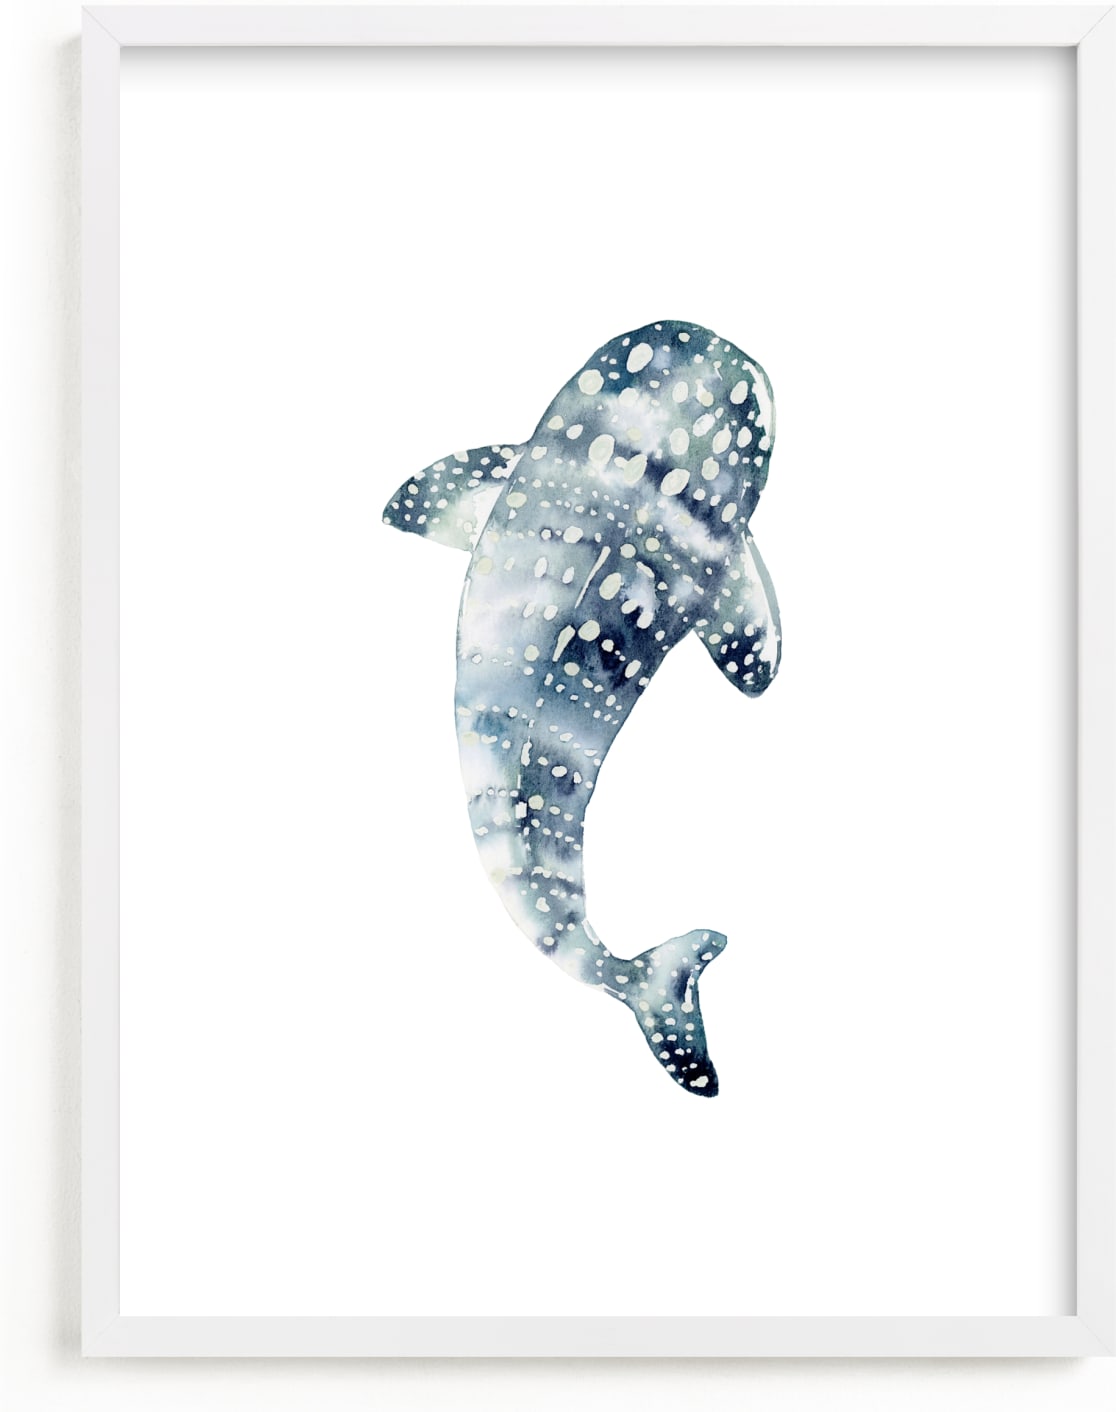 This is a blue kids wall art by Katrina Pete called Celestial Sharks.